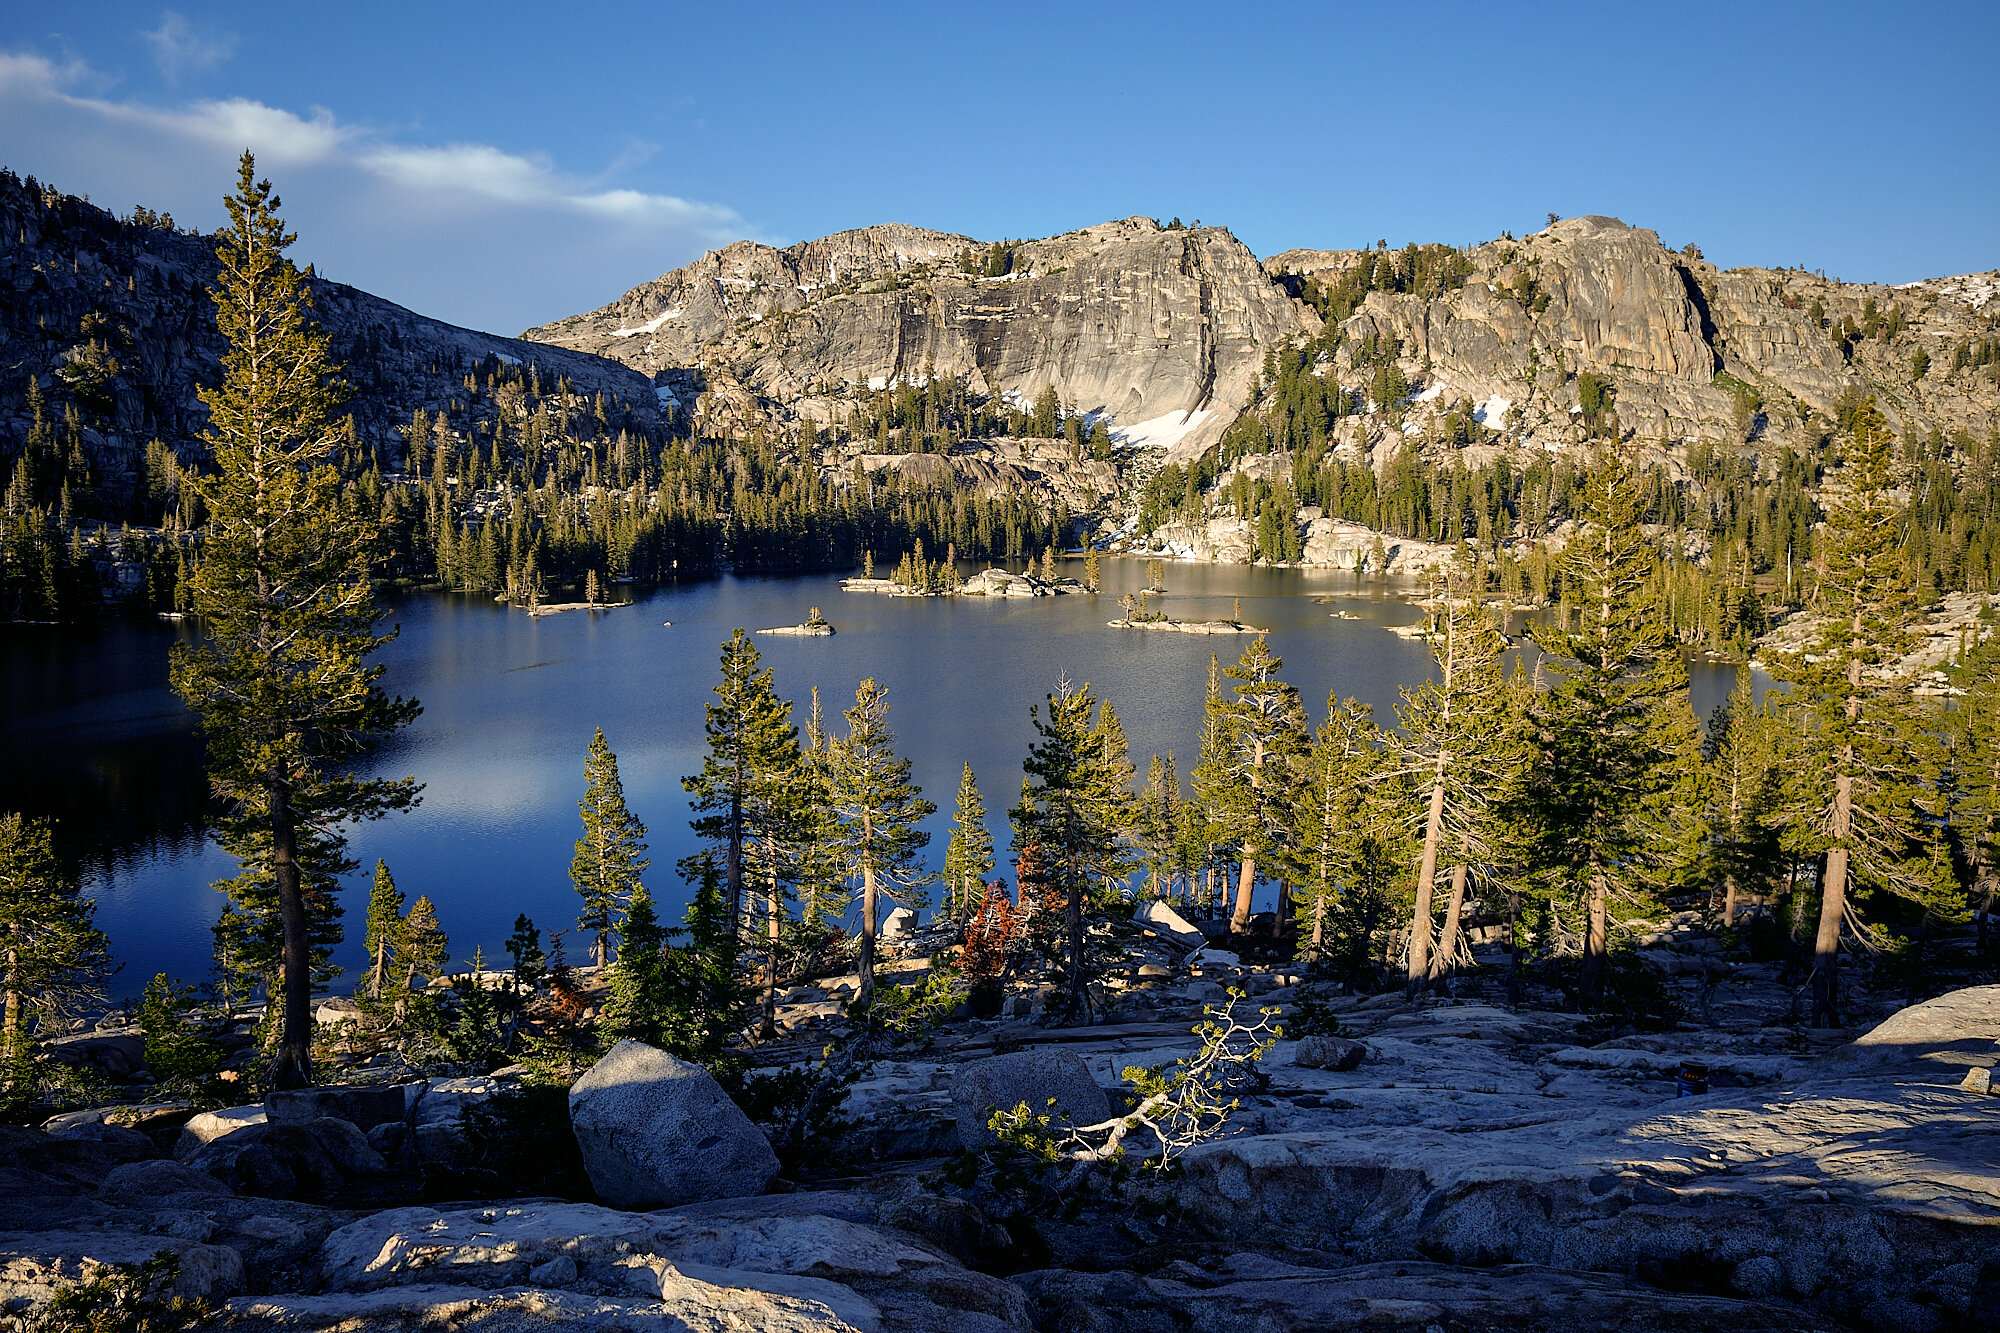  The view of Smedberg Lake from my campsite. | 7/11/19 Mile 968.4, 9,219' 